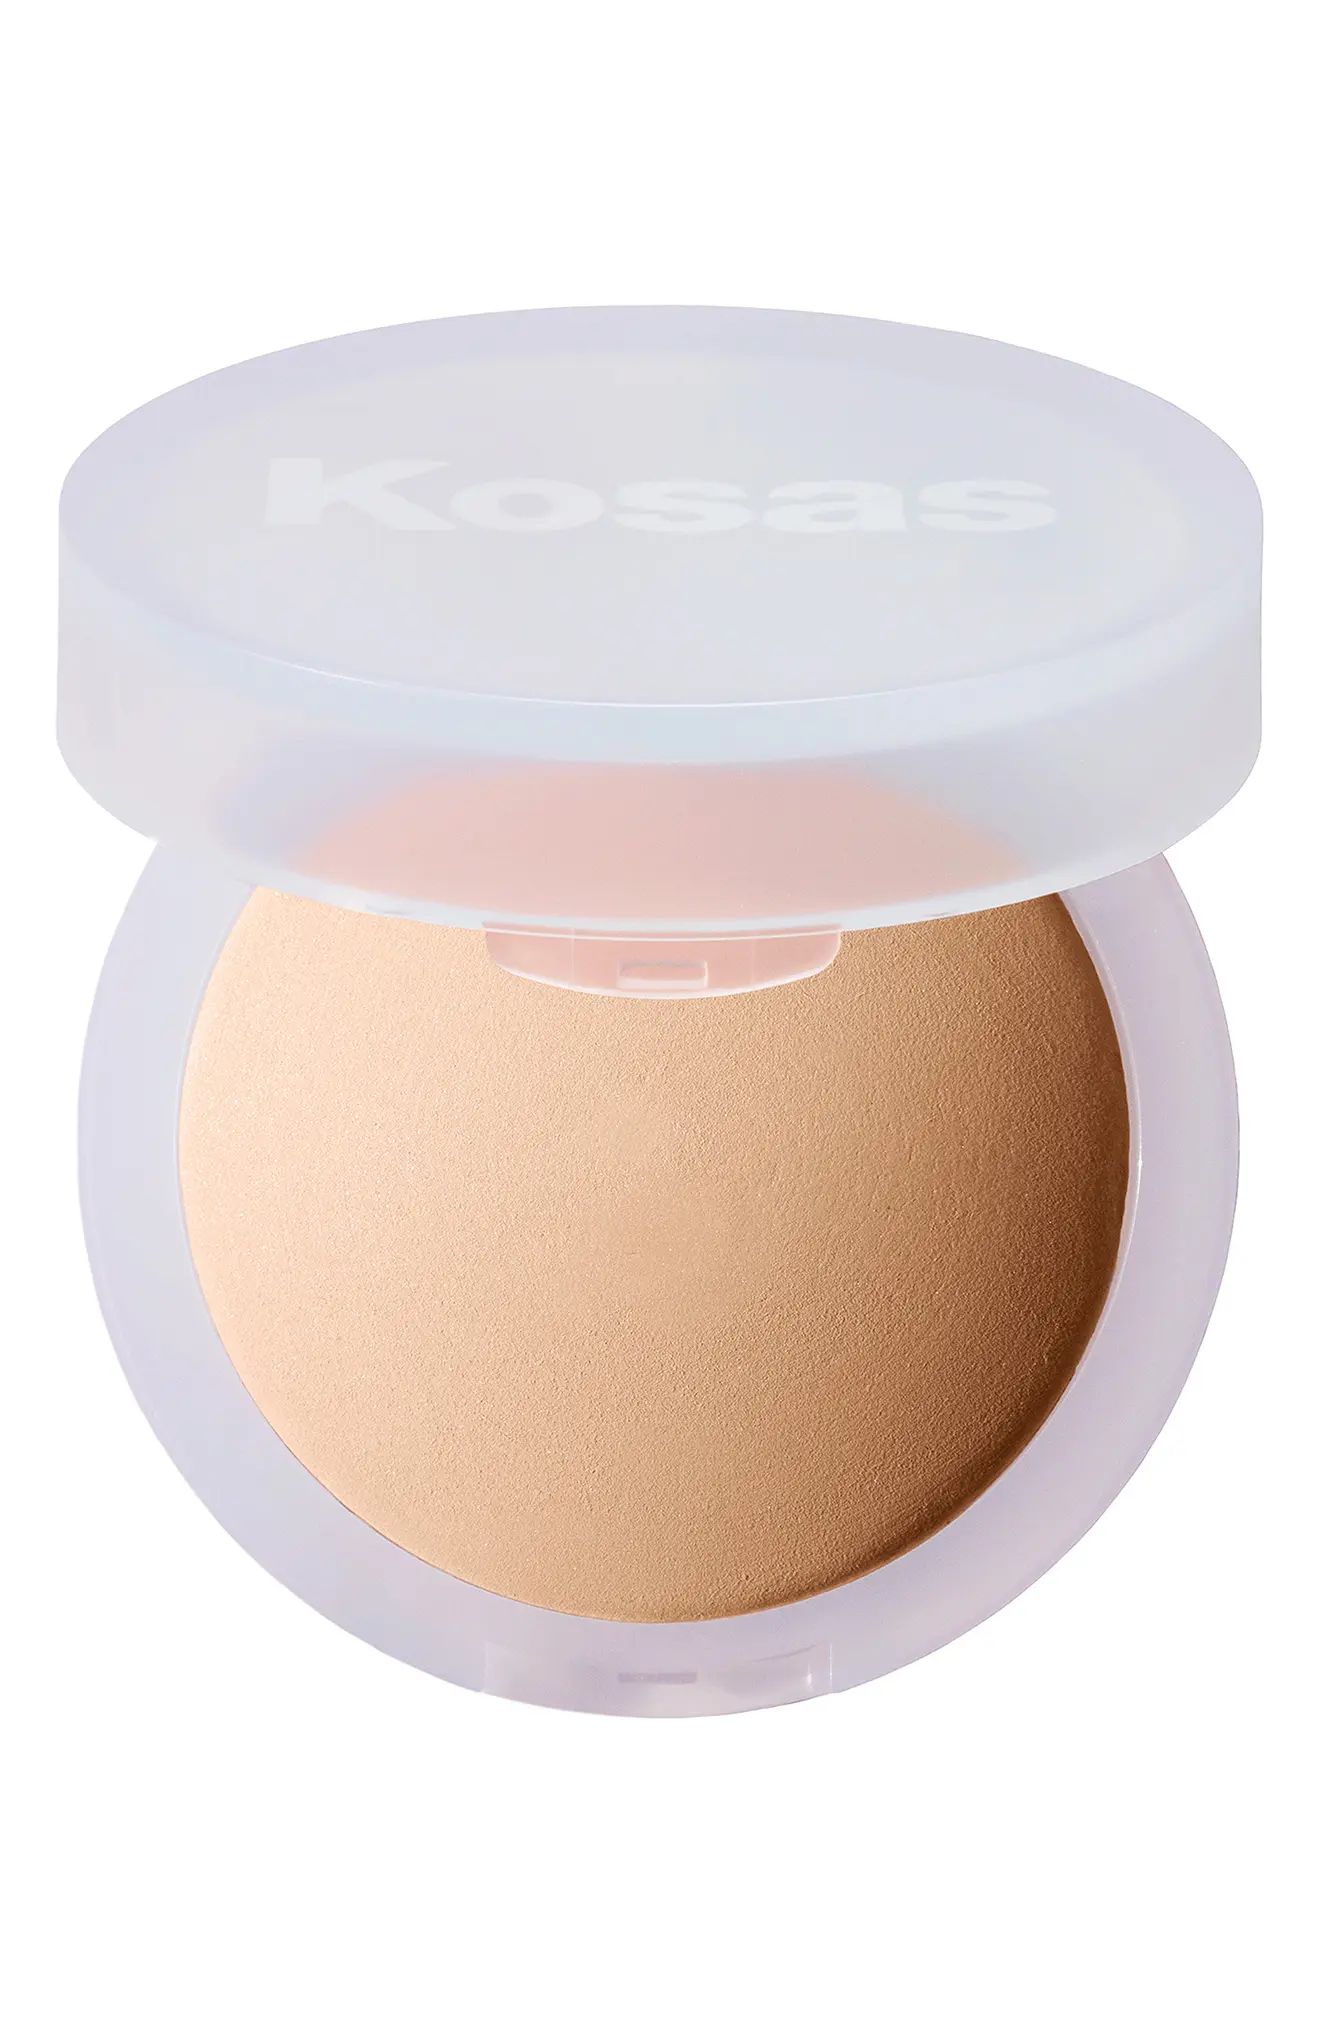 Kosas Cloud Set Baked Setting & Smoothing Powder in Comfy at Nordstrom | Nordstrom